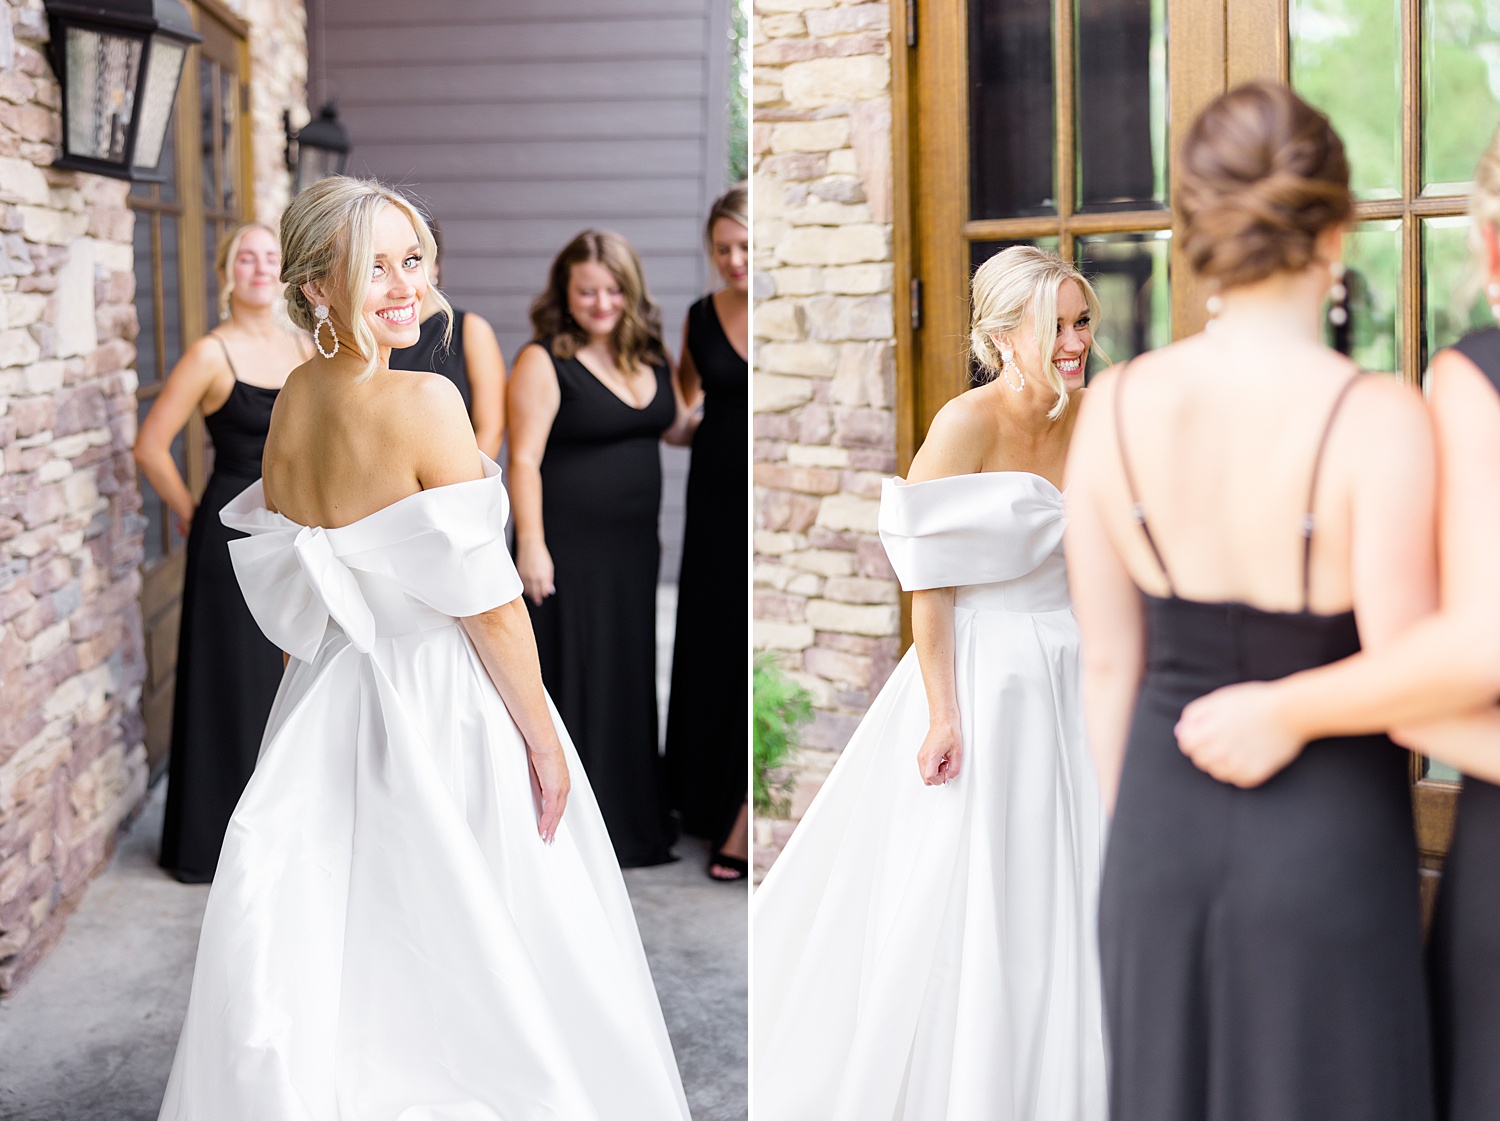 bridesmaids react to see bride for the first time